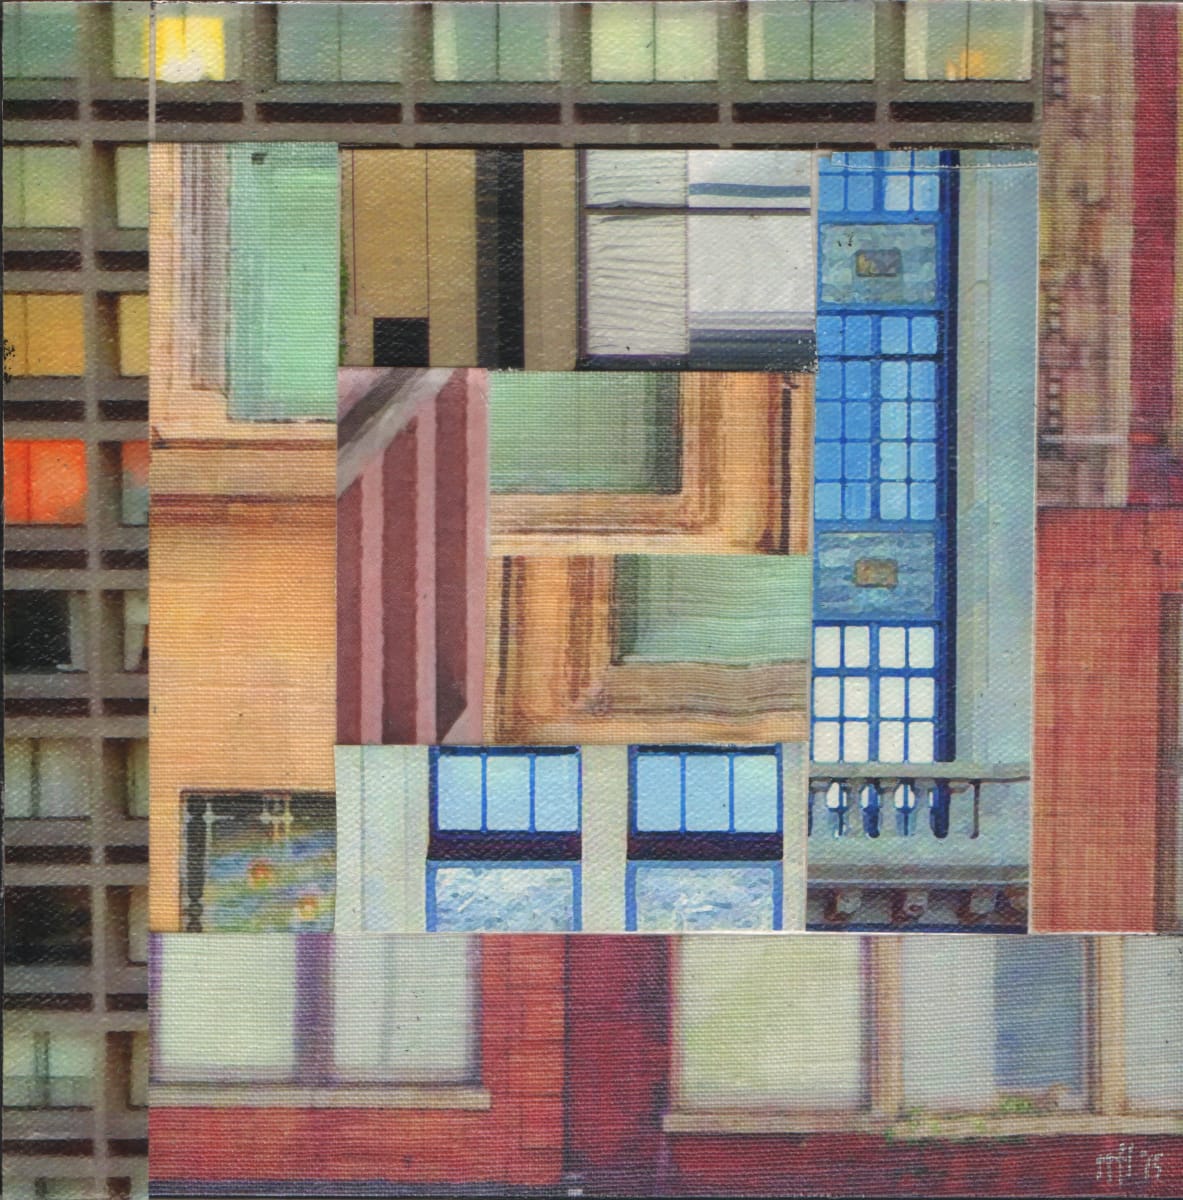 Patchwork City 7 by Marilyn Henrion  Image: Patchwork City 7